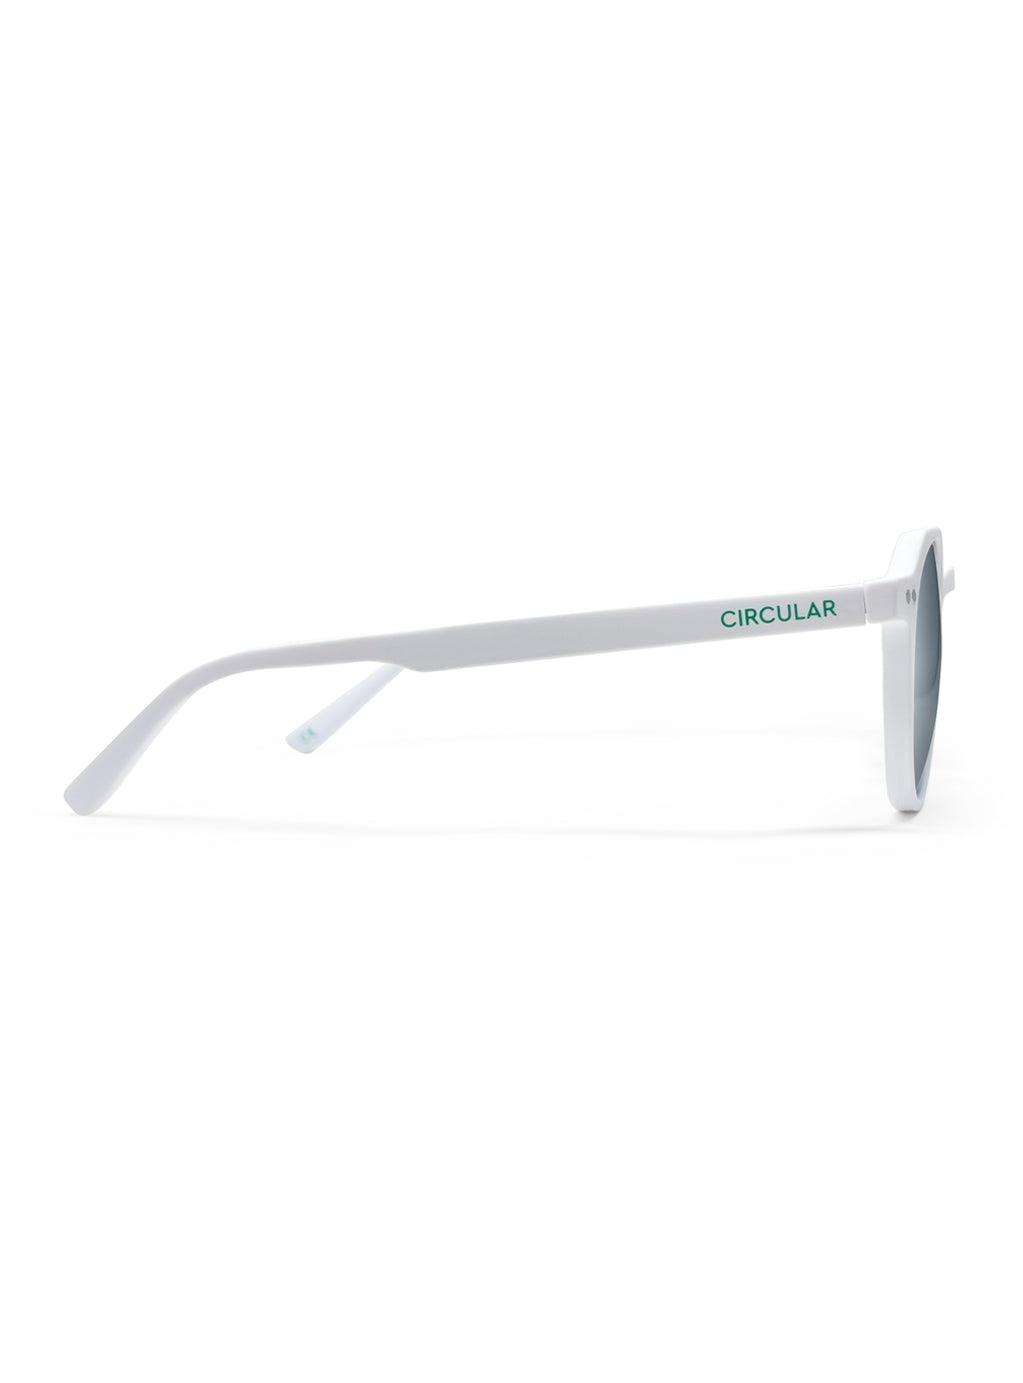 Relive White with Grey Mirrored Lenses